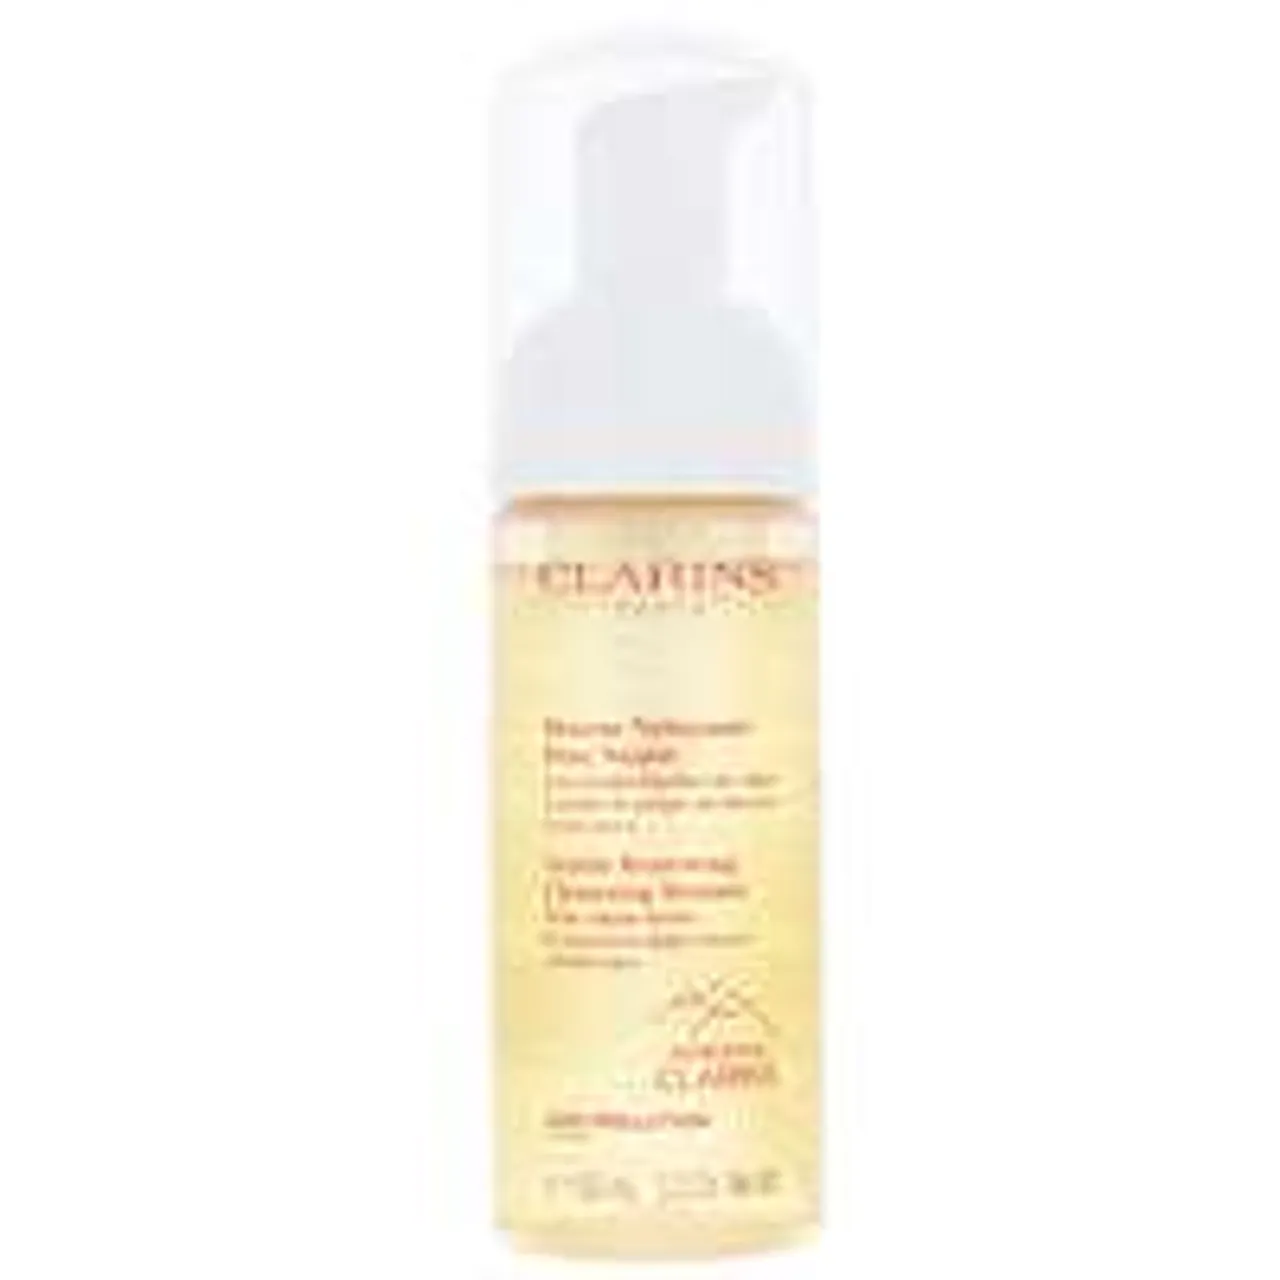 Clarins Cleansers and Toners Gentle Renewing Cleansing Mousse 150ml